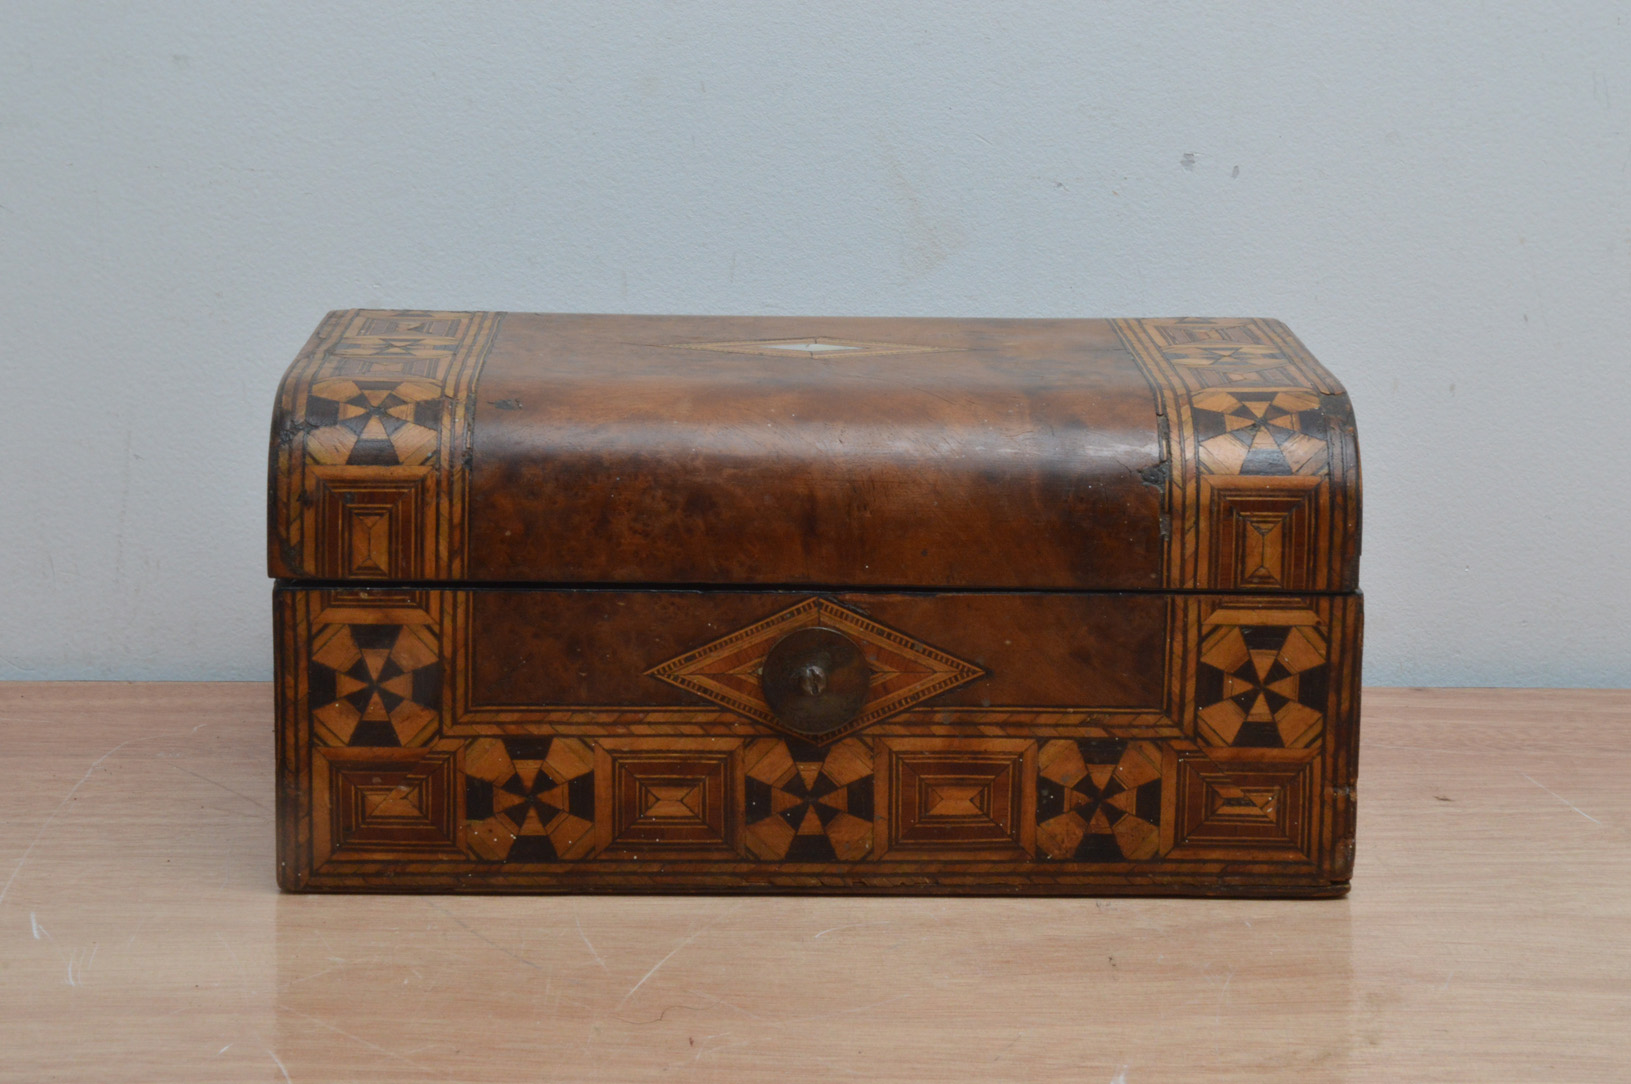 A string work burr walnut jewellery box, the top with mother of pearl inlay in a diamond shape,